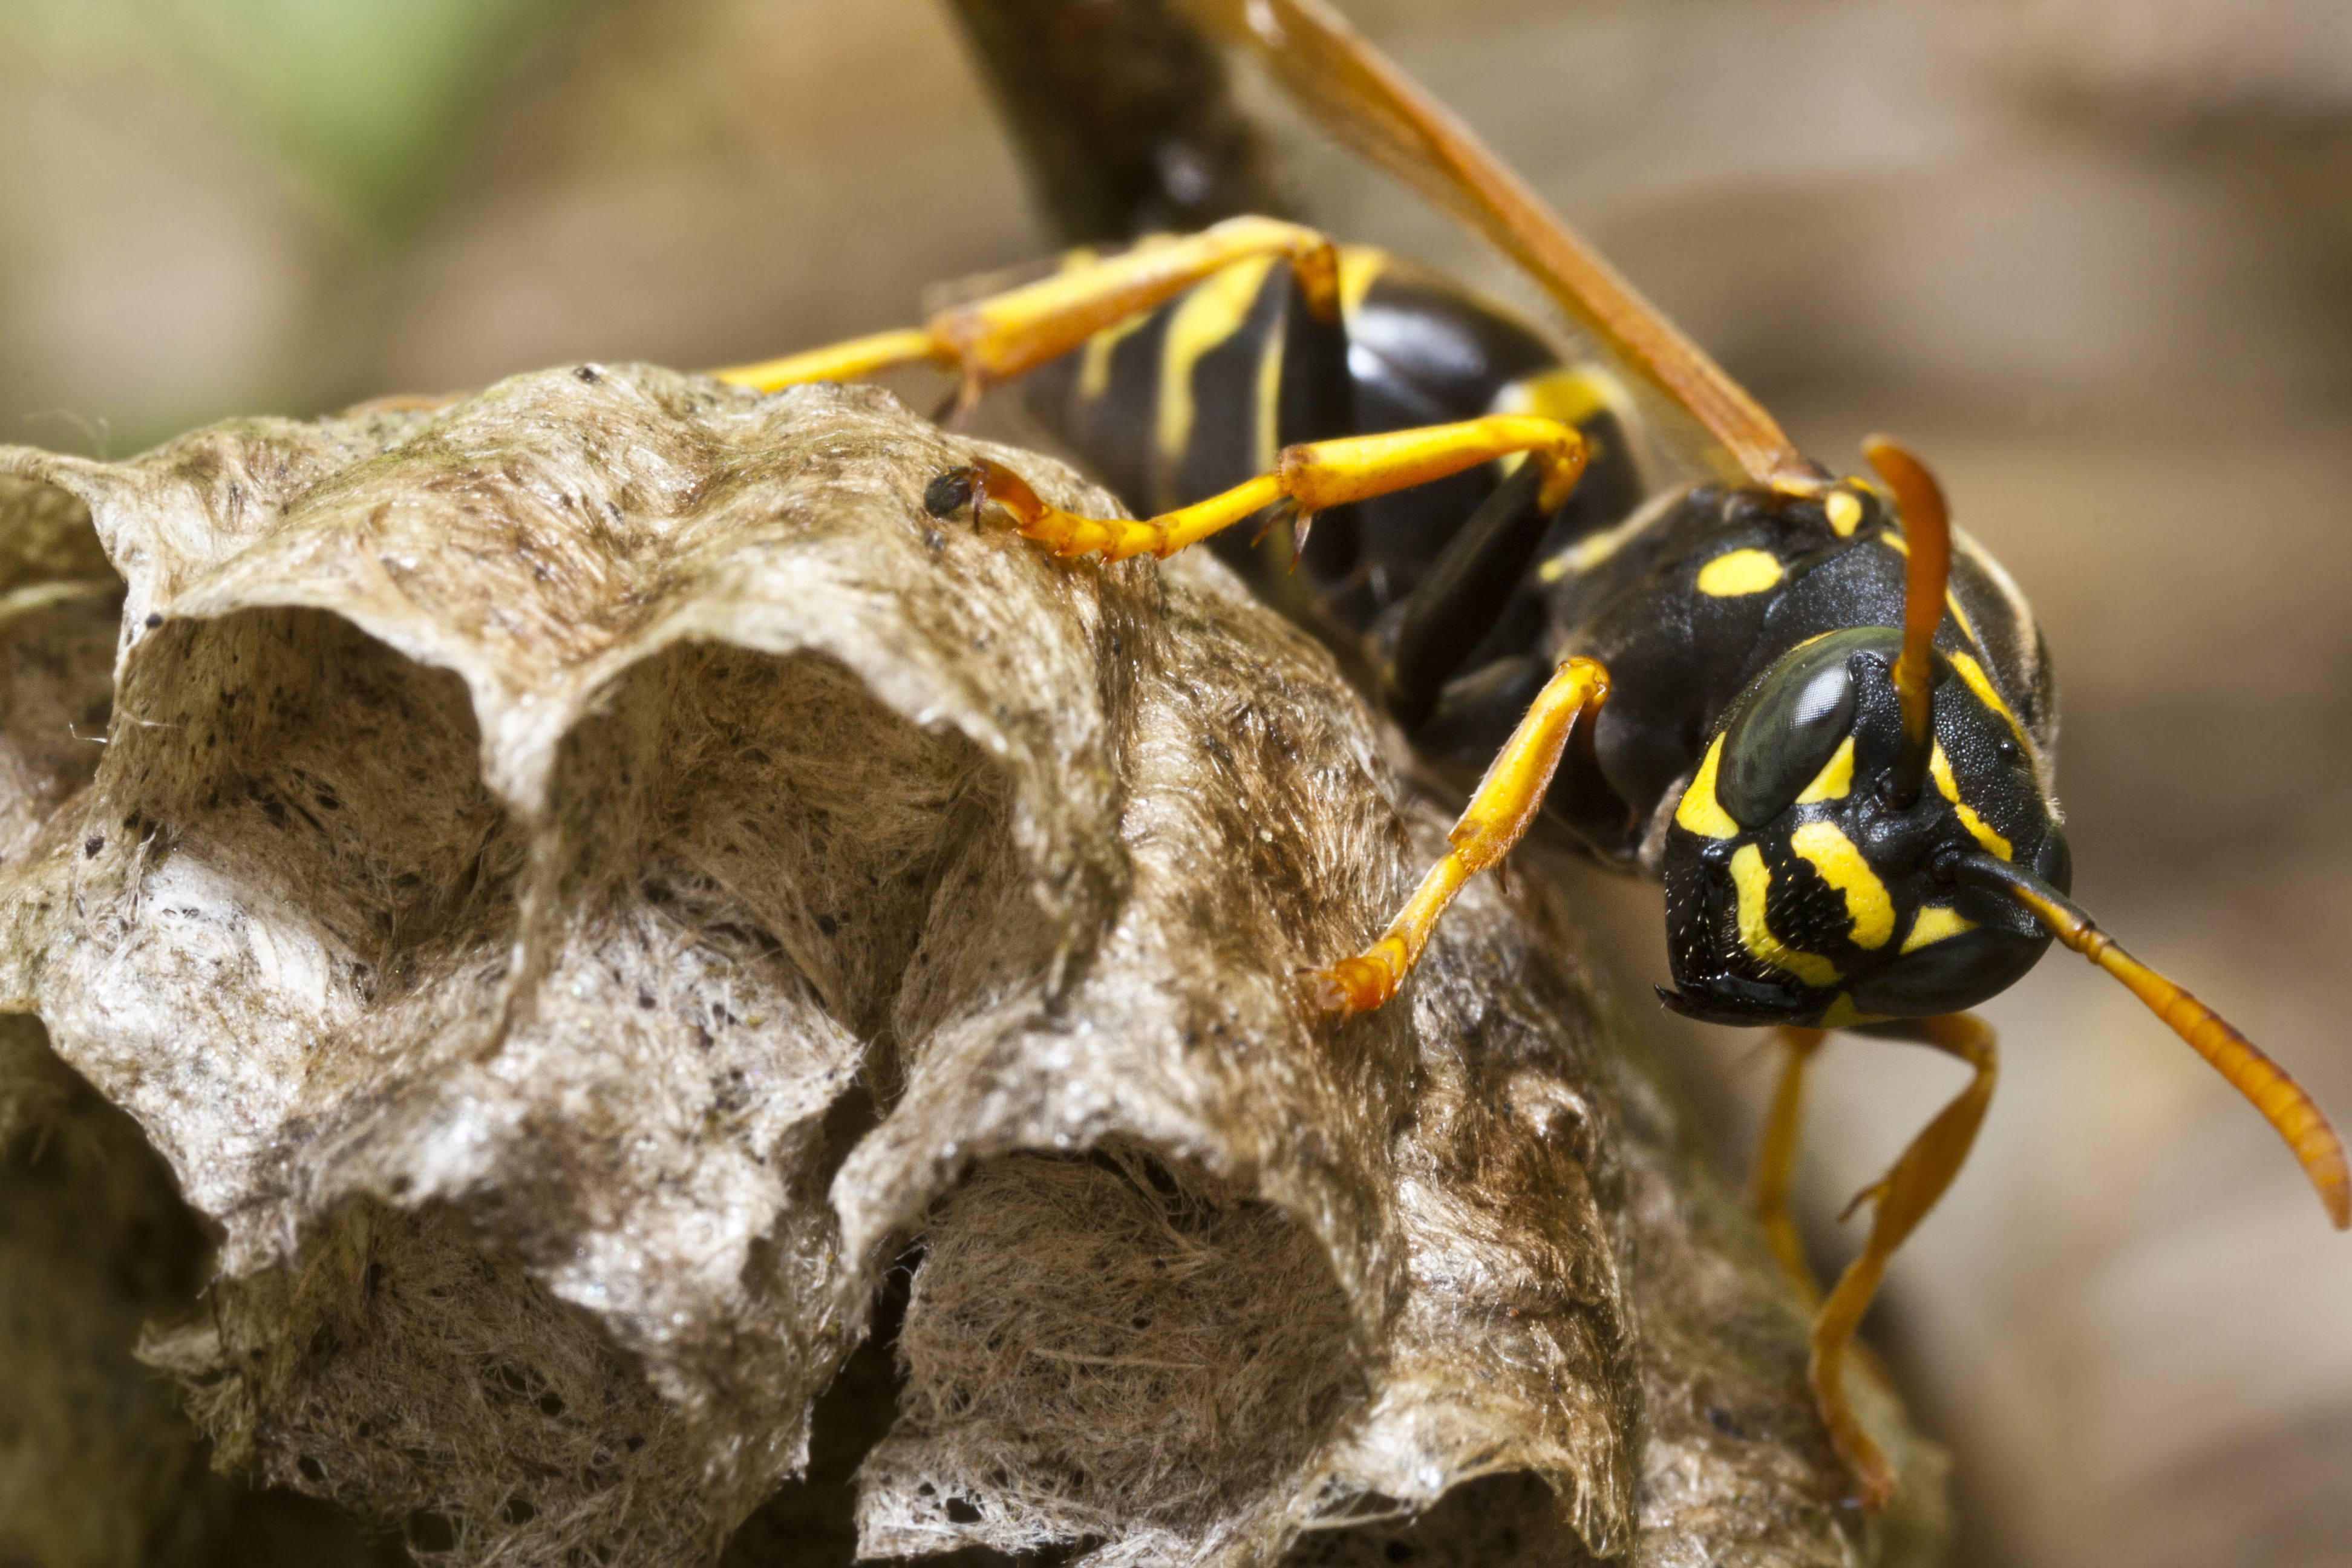 Yellow Jacket Removal In Texas  Yellow Jackets Vs. Other Wasps